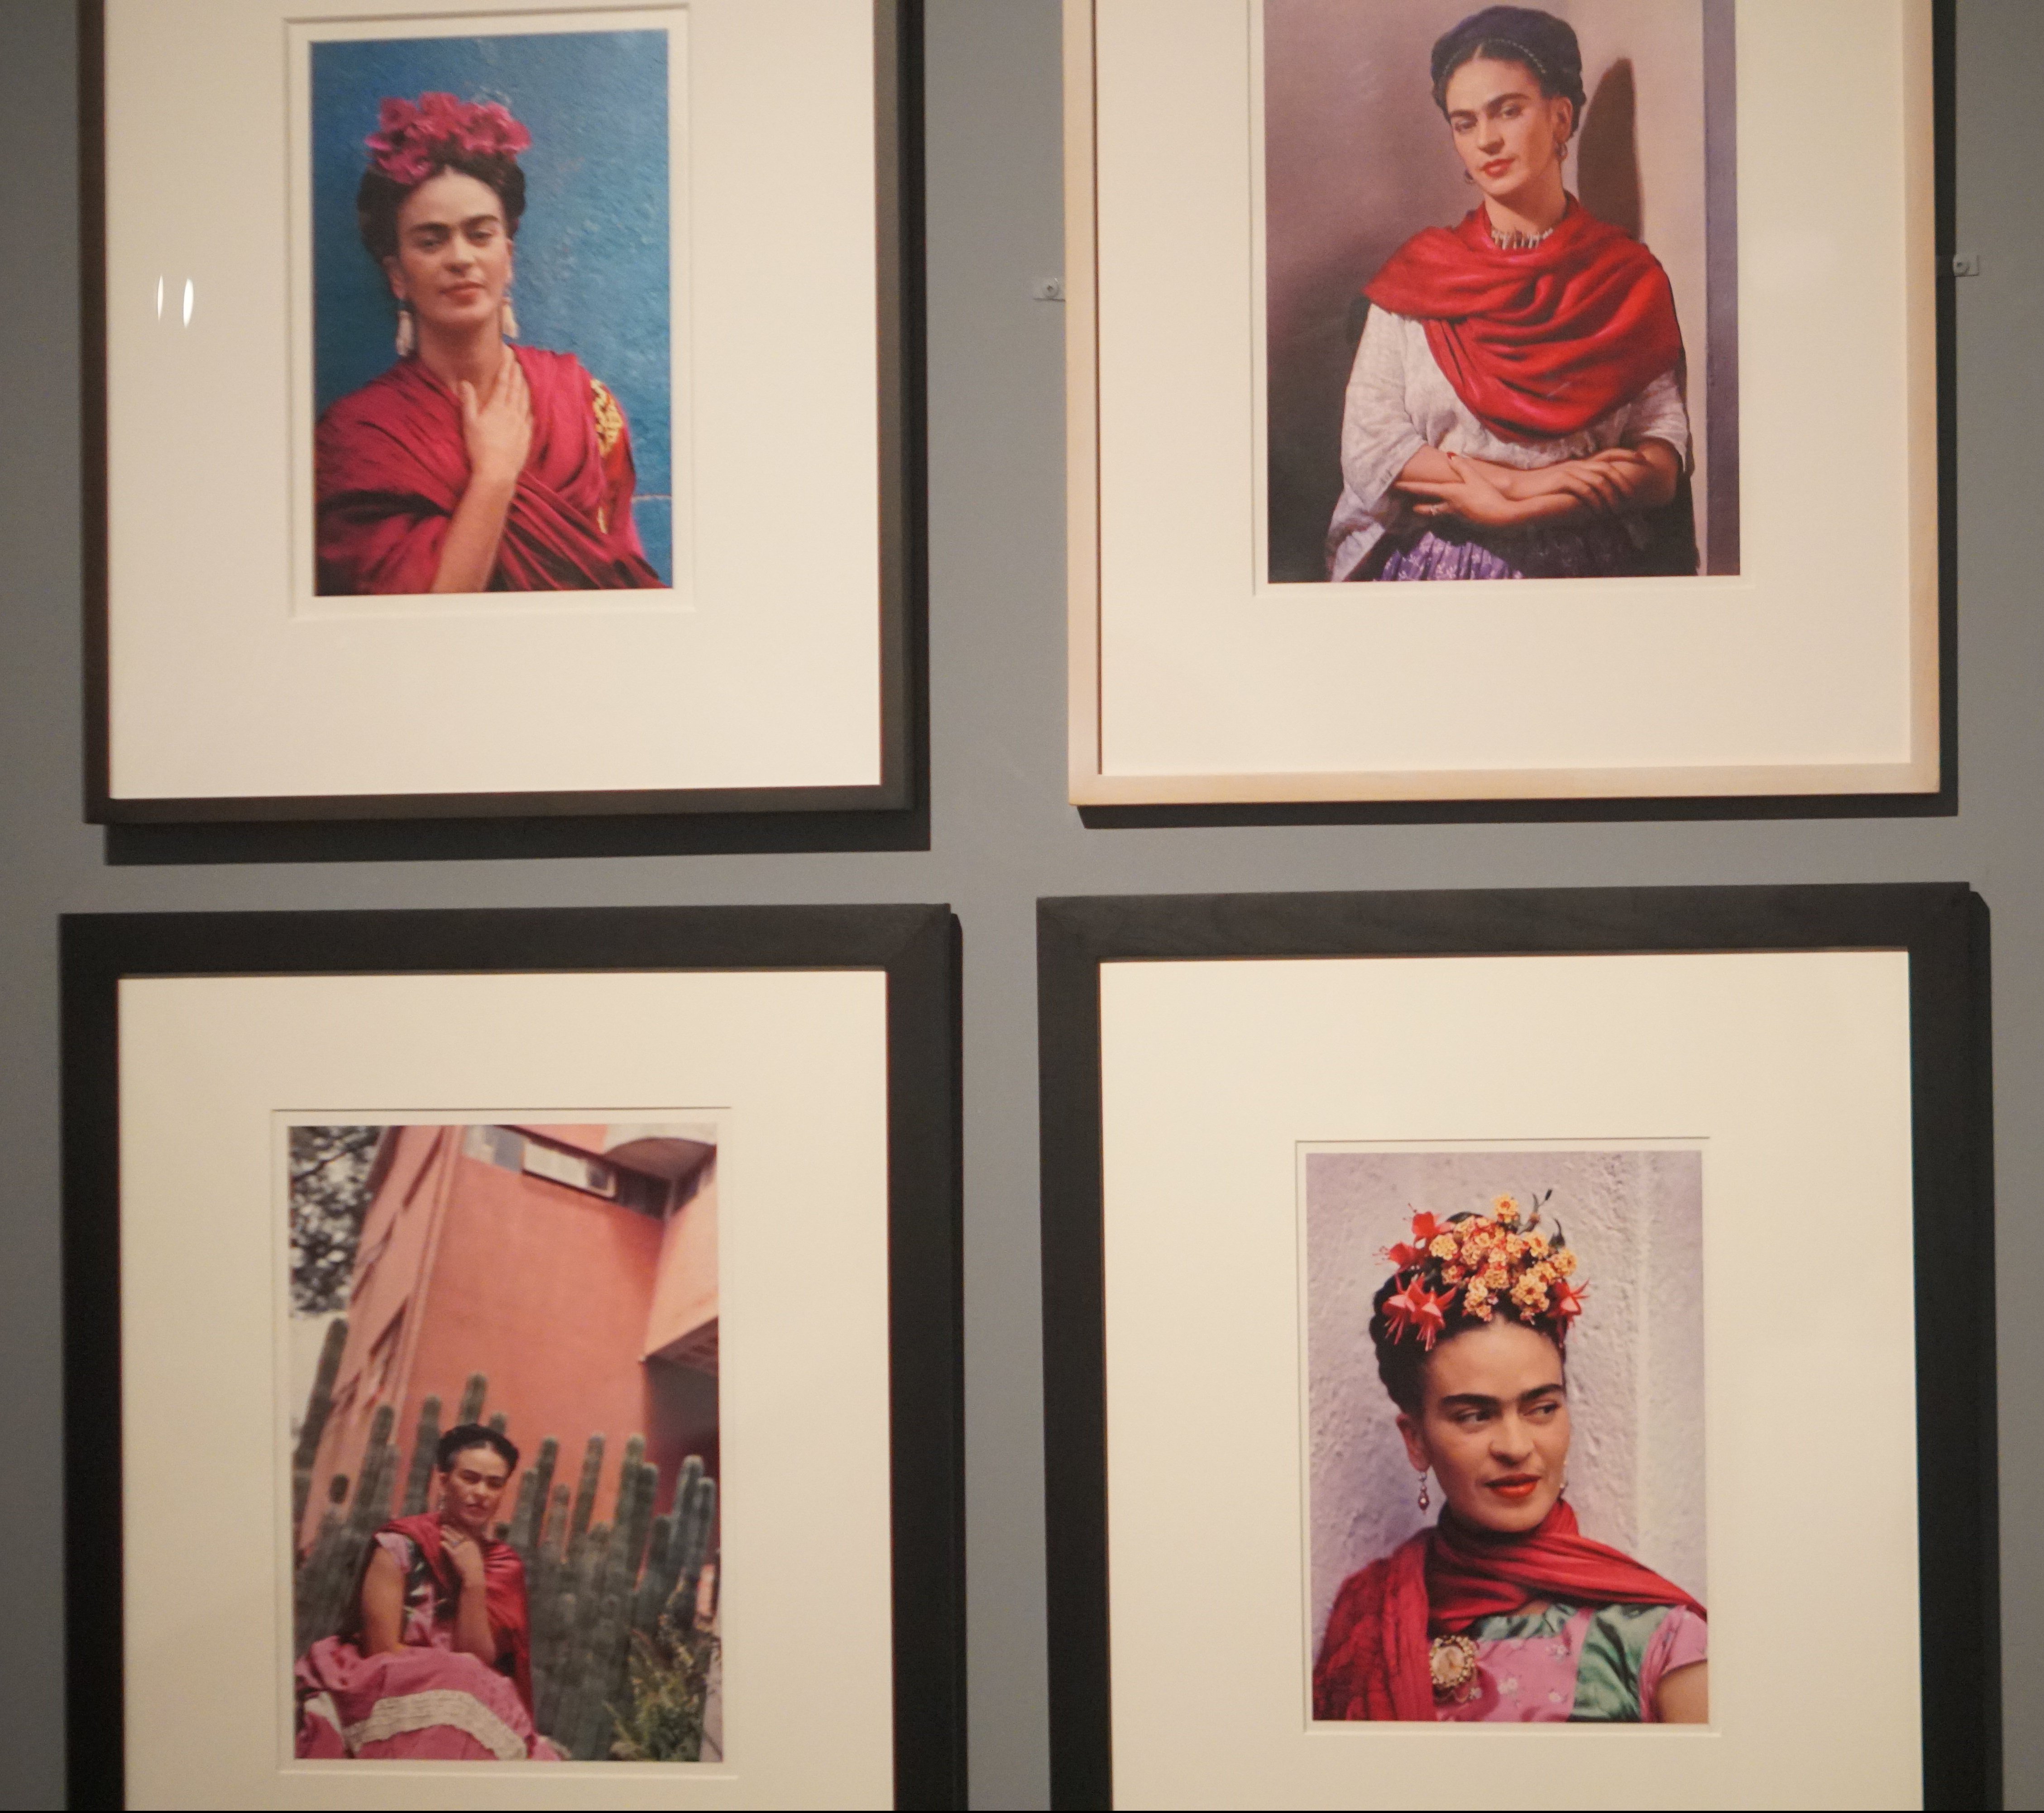 Frida Kahlo: Appearances Can Be Deceiving